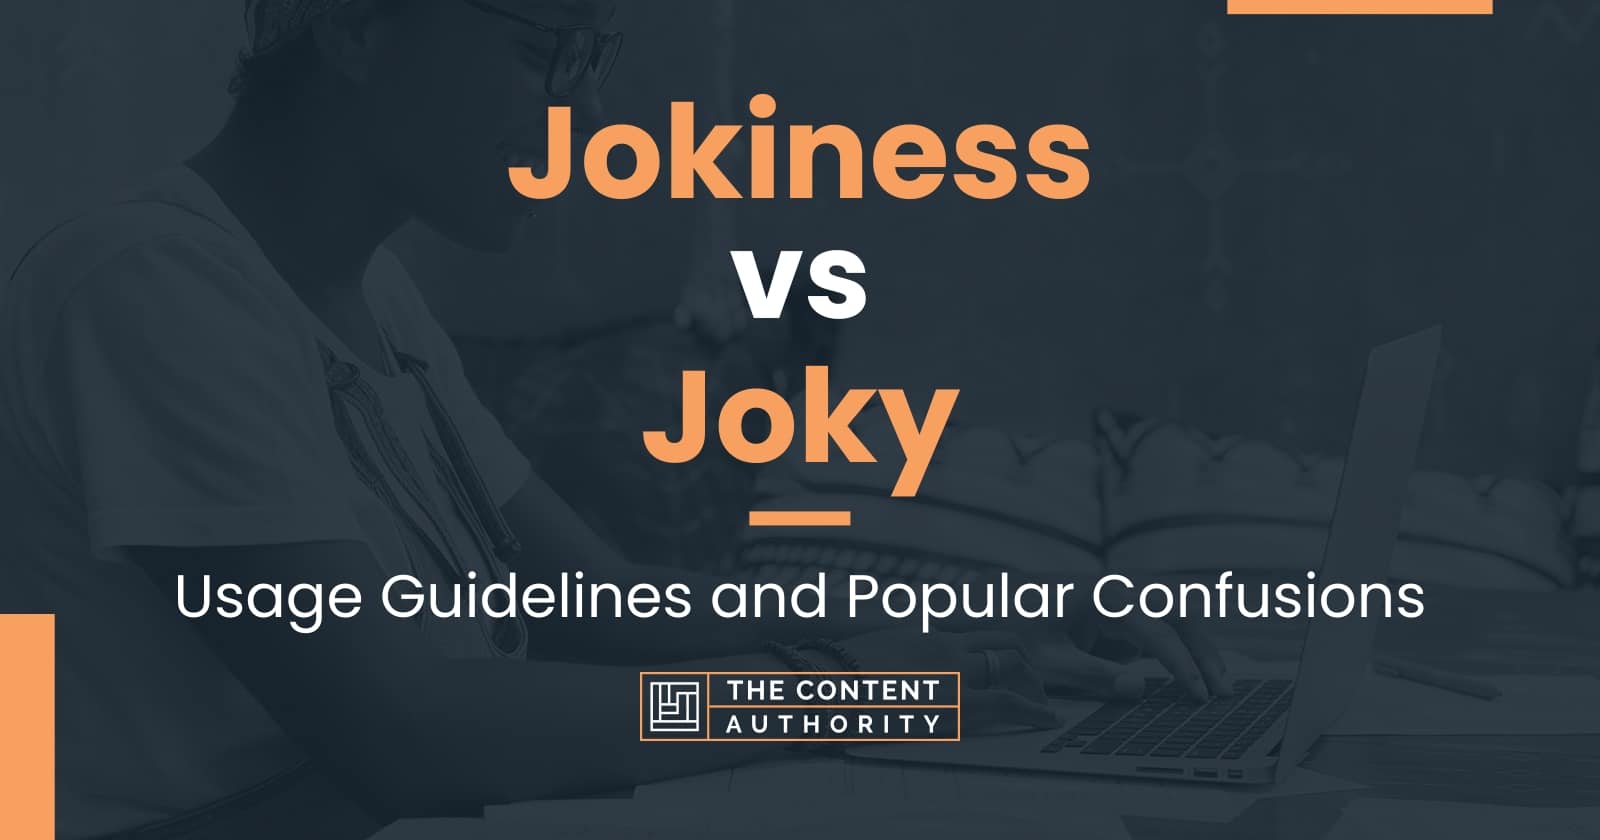 Jokiness vs Joky Usage Guidelines and Popular Confusions